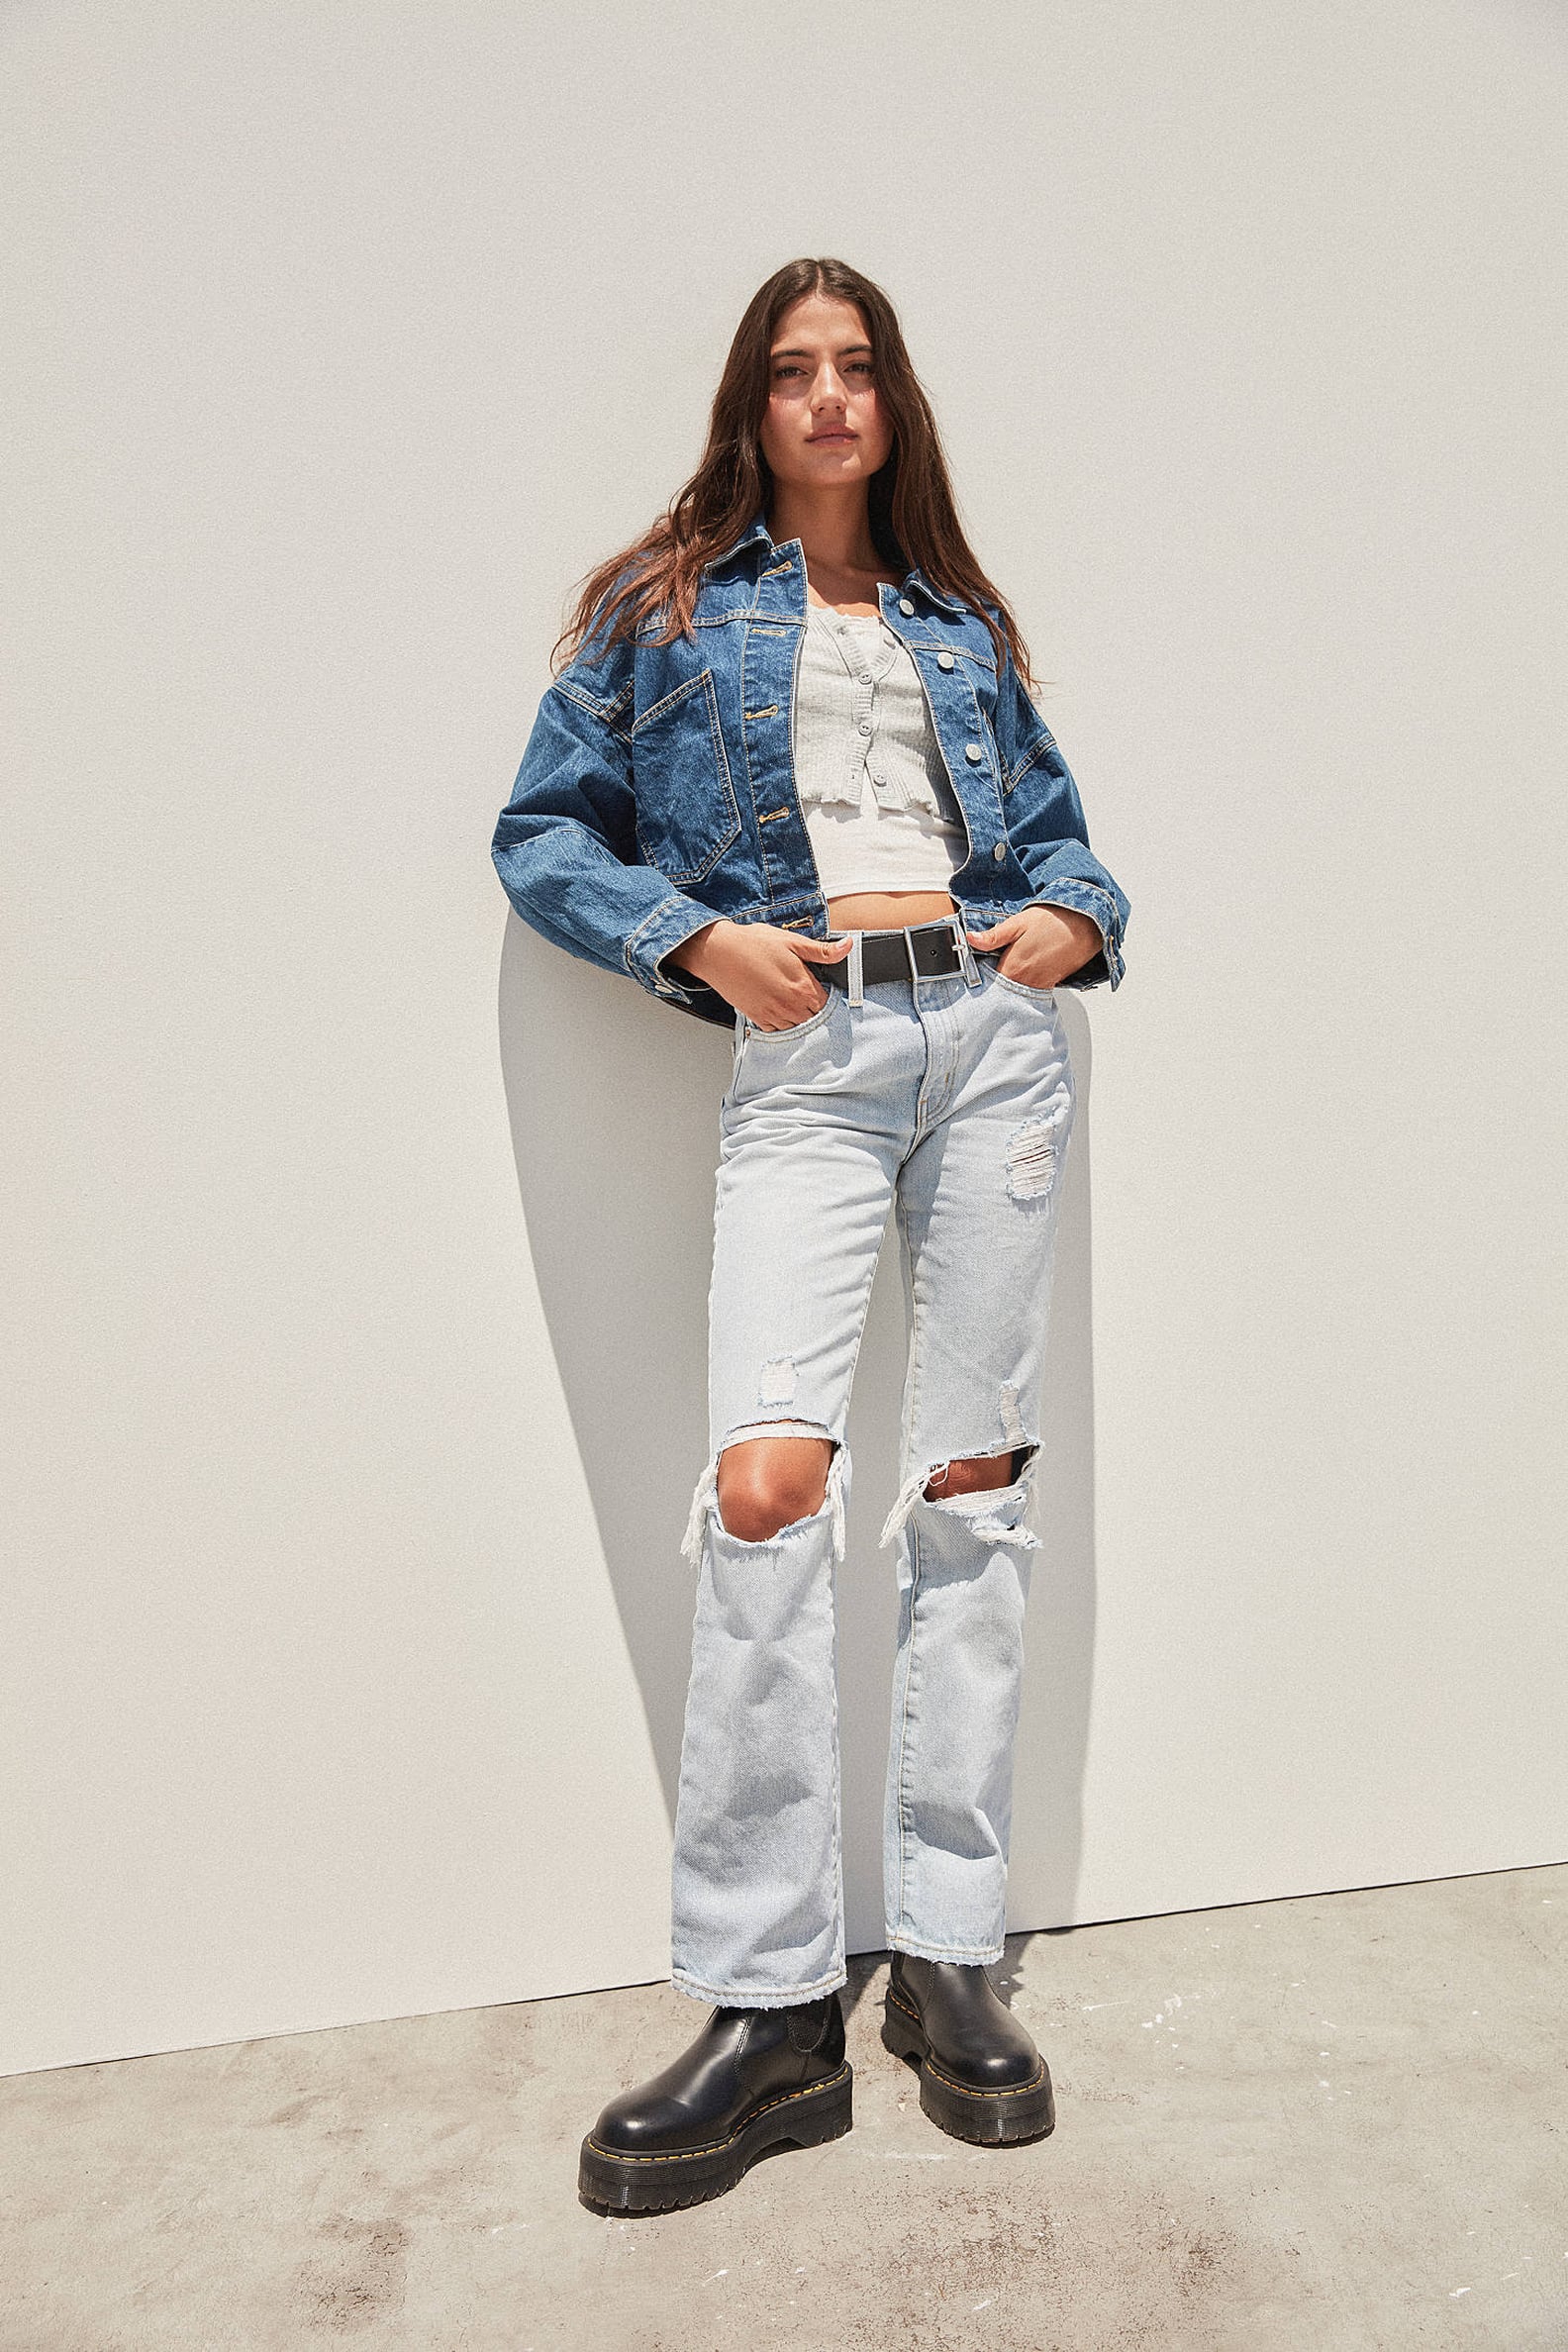 Best Urban Outfitters Clothes August 2019 | POPSUGAR Fashion